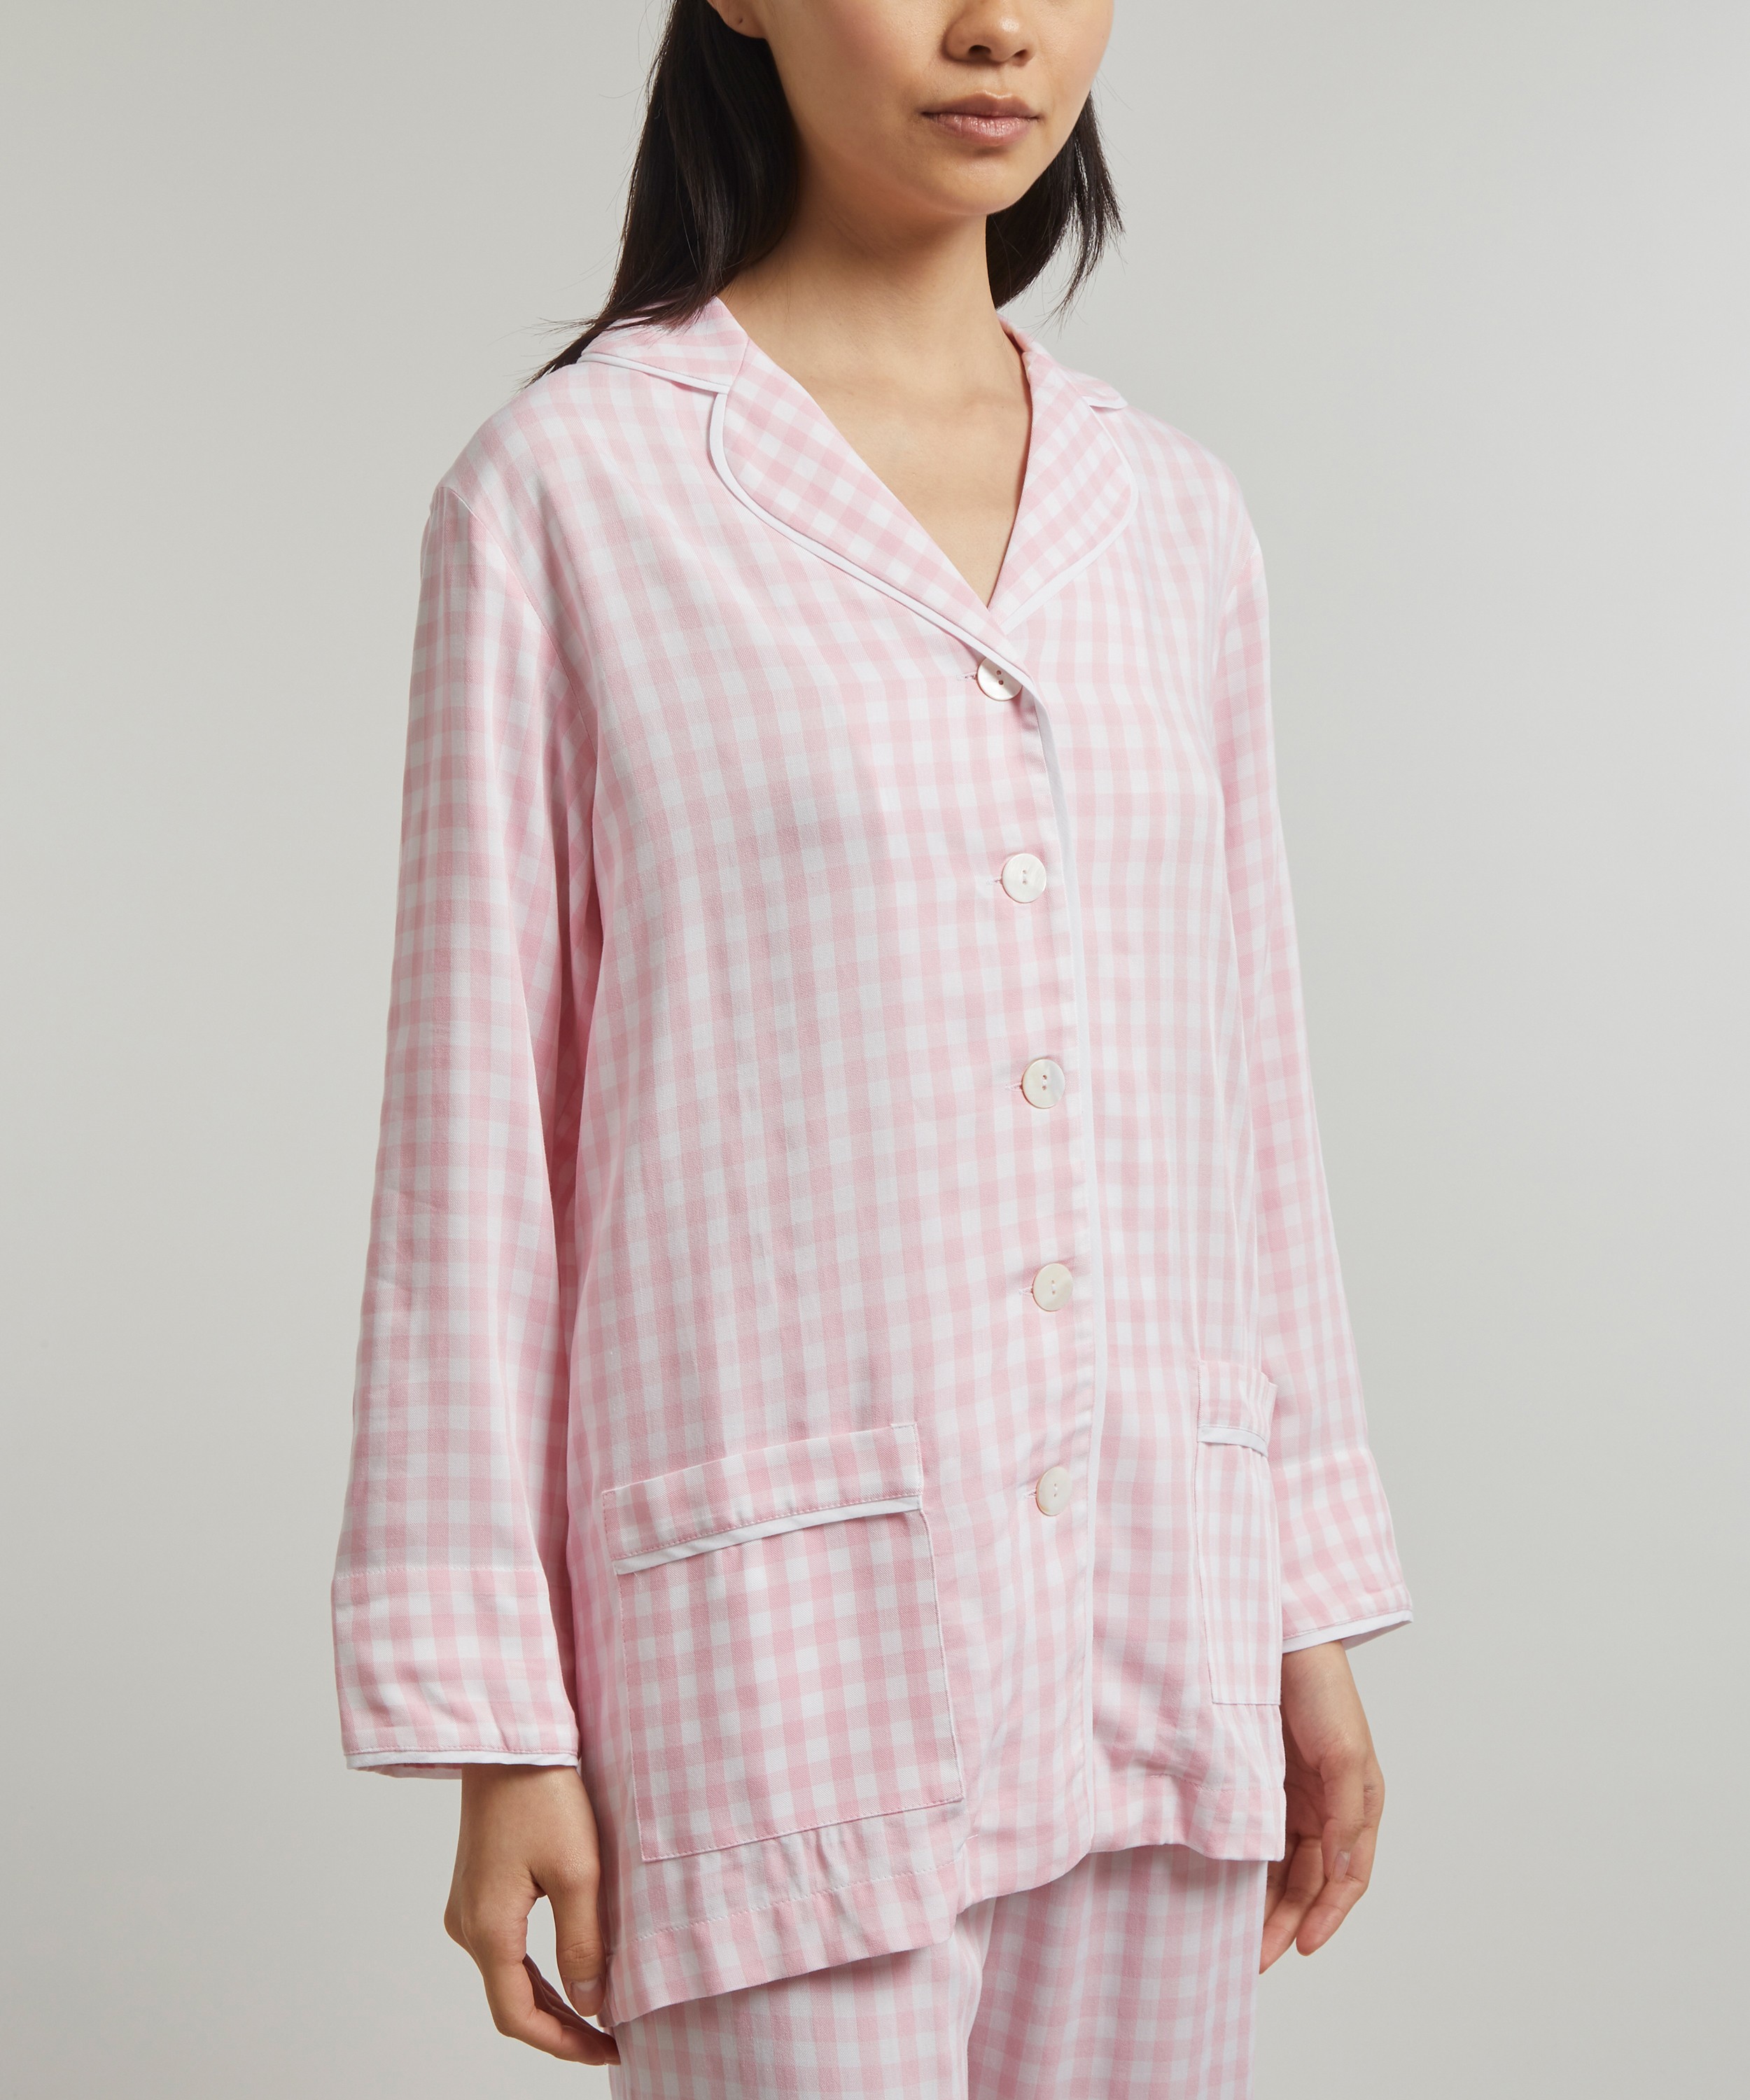 Party Pajama with Detachable Feathers in Pink Stripes